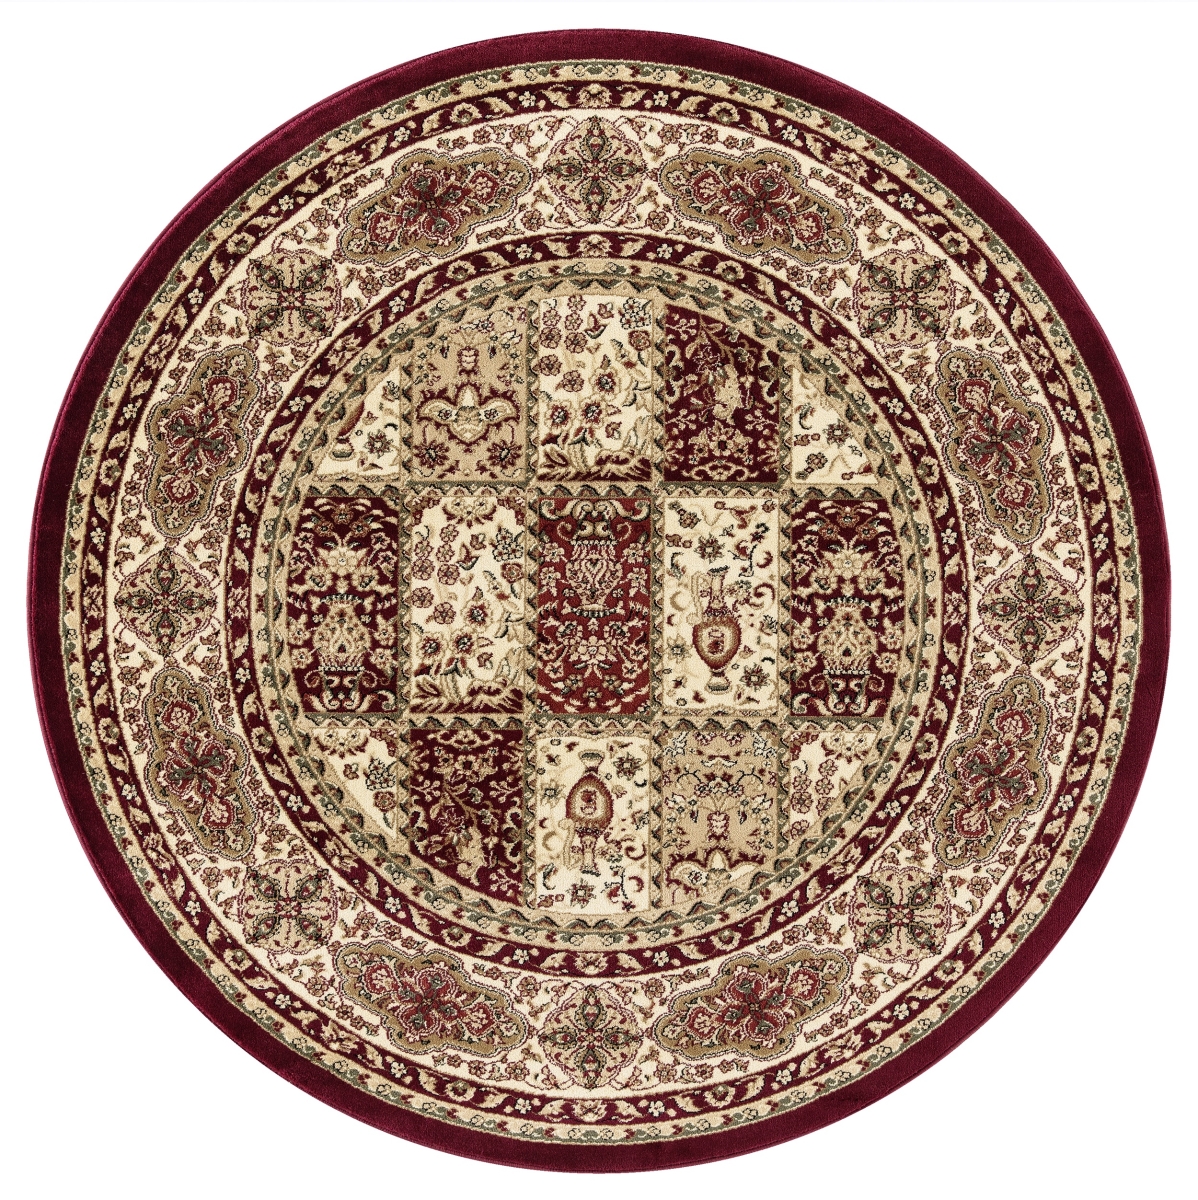 C483.04.rd.5r 5 Ft. Classic Baykal Traditional & Oriental Rug, Red & Cream